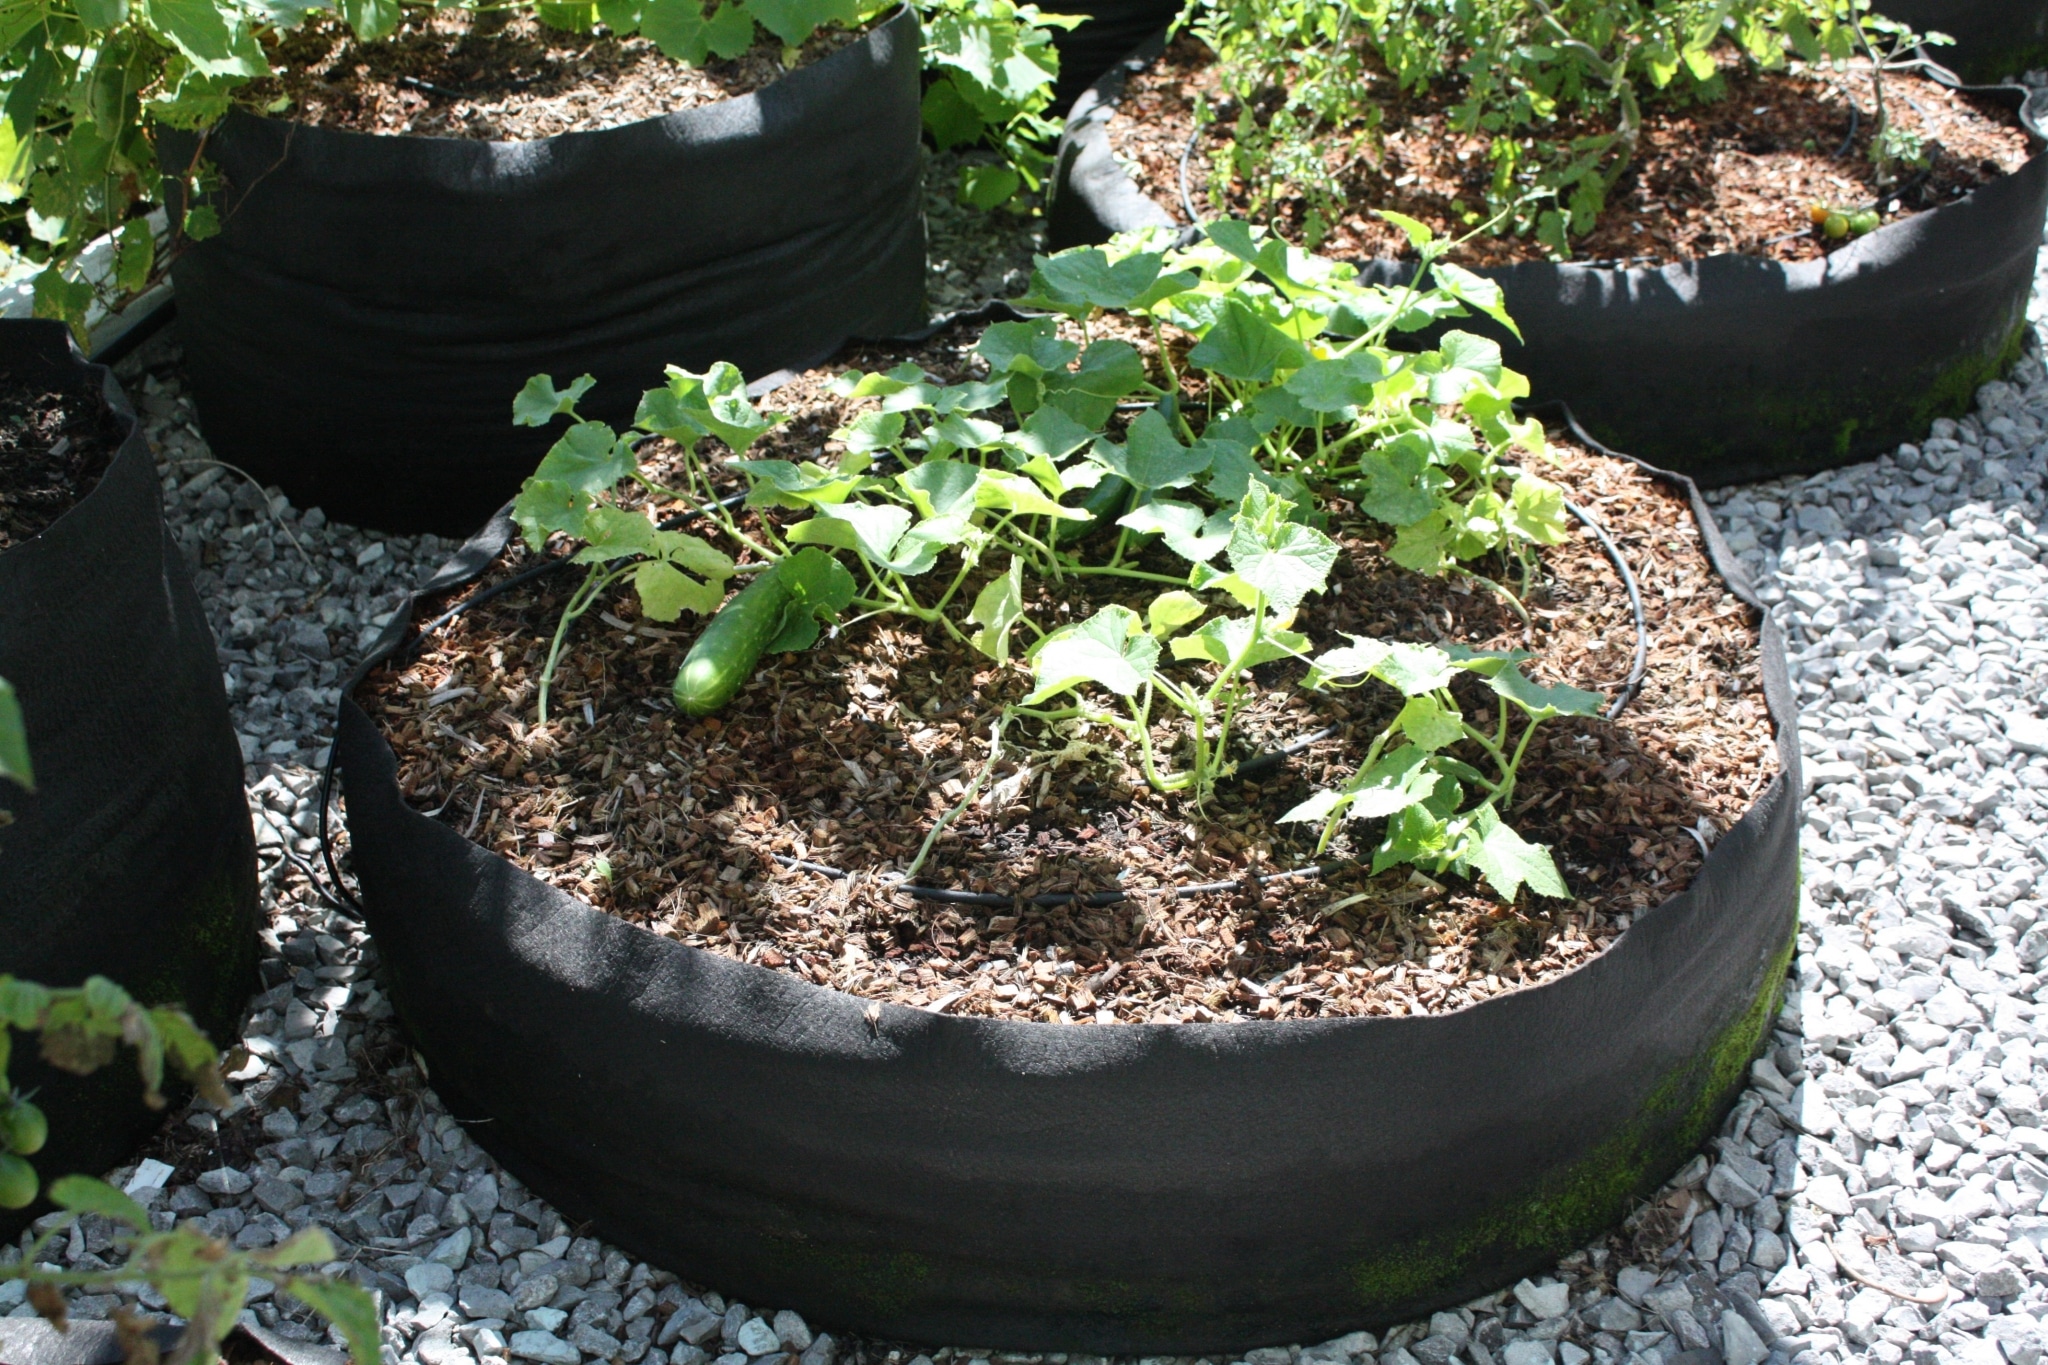 Vine plants grown in Smart Pot containers